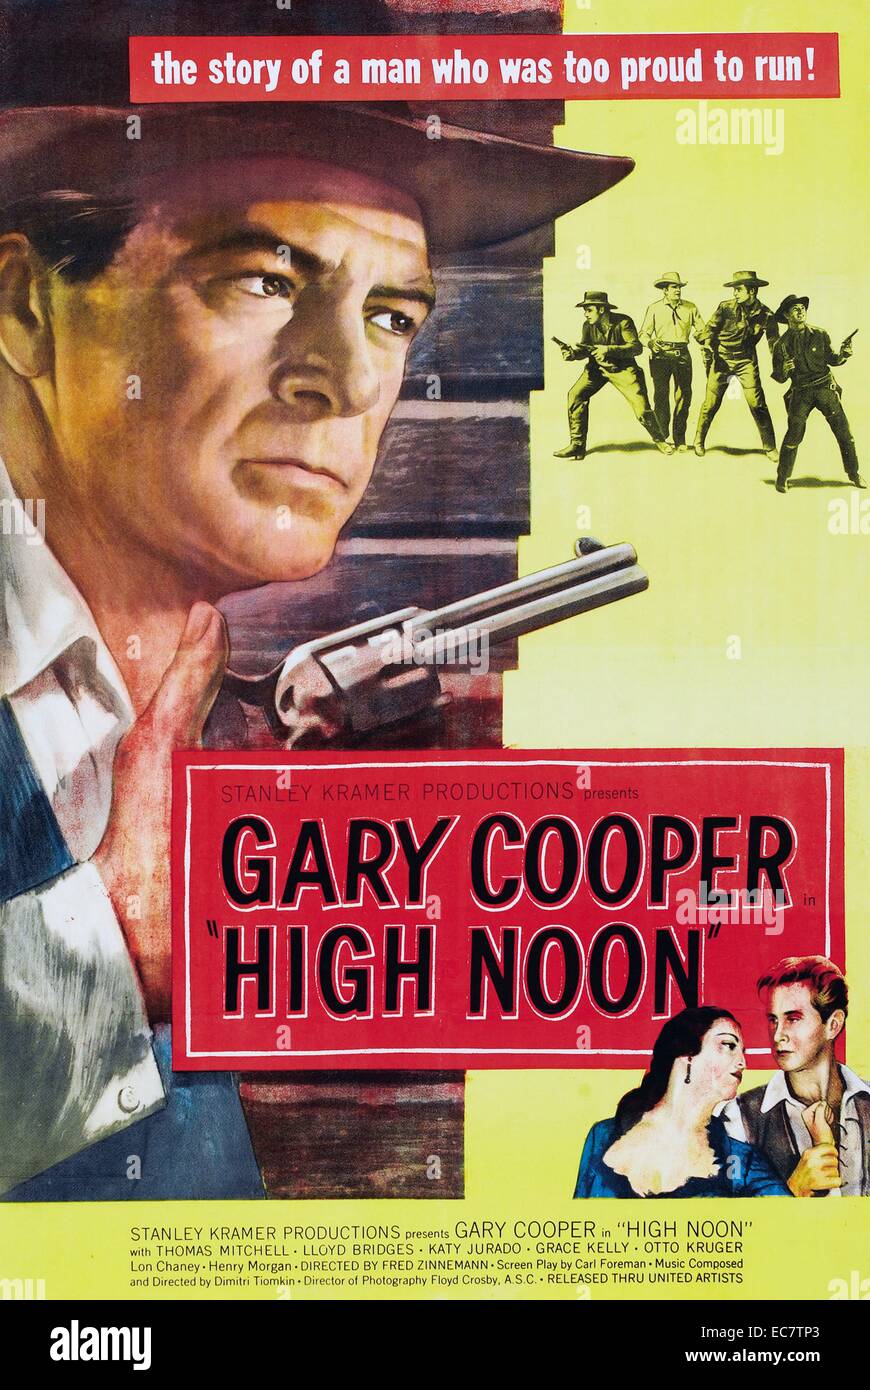 High Noon is a 1952 American Western film directed by Fred Zinnemann and starring Gary Cooper and Grace Kelly. In nearly real time, the film tells the story of a town marshal forced to face a gang of killers by himself. Stock Photo